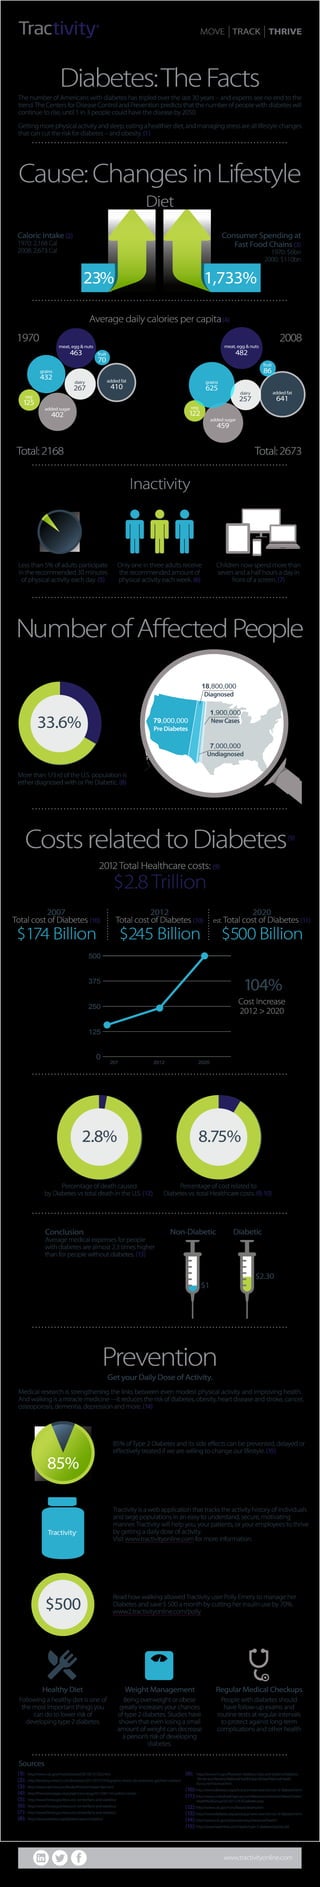 Diabetes:TheFacts
More than 1/3rd of the U.S. population is
either diagnosed with or Pre Diabetic. (8)
Percentage of death caused
by Diabetes vs total death in the U.S. (12)
Percentage of cost related to
Diabetes vs. total Healthcare costs. (9,10)
85% ofType 2 Diabetes and its side effects can be prevented, delayed or
effectively treated if we are willing to change our lifestyle. (15)
Tractivity is a web application that tracks the activity history of individuals
and large populations in an easy to understand, secure, motivating
manner.Tractivity will help you, your patients, or your employees to thrive
by getting a daily dose of activity.
Visit www.tractivityonline.com for more information.
Read how walking allowedTractivity user Polly Emery to manage her
Diabetes and save $ 500 a month by cutting her insulin use by 70%.
www2.tractivityonline.com/polly
(1): http://www.cdc.gov/media/pressrel/2010/r101022.html
(2): http://berkeley.news21.com/theration/2011/07/27/infographic-where-do-americans-get-their-calories/
(3): http://www.nytimes.com/books/first/s/schlosser-fast.html
(4): http://thesocietypages.org/graphicsociology/011/04/11/nutrition-circles/
(5): http://www.fitness.gov/resource-center/facts-and-statistics/
(6): http://www.fitness.gov/resource-center/facts-and-statistics/
(7): http://www.fitness.gov/resource-center/facts-and-statistics/
(8): http://www.diabetes.org/diabetes-basics/statistics/
(9): http://www.cms.gov/Research-Statistics-Data-and-Systems/Statistics-
Trends-and-Reports/NationalHealthExpendData/NationalHealth
AccountsHistorical.html
(10): http://www.diabetes.org/advocacy/news-events/cost-of-diabetes.html
(11): http://www.unitedhealthgroup.com/Newsroom/Articles/News/United
Health%20Group/2010/1123USDiabetes.aspx
(12): http://www.cdc.gov/nchs/fastats/deaths.htm
(13): http://www.diabetes.org/advocacy/news-events/cost-of-diabetes.html
(14): http://www.cdc.gov/physicalactivity/everyone/health/
(15): http://www.healthline.com/health/type-2-diabetes/statistics#3
Conclusion:
Average medical expenses for people
with diabetes are almost 2.3 times higher
than for people without diabetes. (13)
Non-Diabetic
Average daily calories per capita(4)
2012Total Healthcare costs: (9)
Caloric Intake (2)
1970: 2,168 Cal
2008: 2,673 Cal
Consumer Spending at
Fast Food Chains (3)
1970: $6bn
2000: $110bn
18,800,000
Diagnosed
1,900,000
New Cases
7,000,000
Undiagnosed
79,000,000
Pre Diabetes
0
207 2012 2020
125
250
375
500
Diabetic
$1
$2.30
Weight ManagementHealthy Diet
Sources
Regular Medical Checkups
85%
The number of Americans with diabetes has tripled over the last 30 years – and experts see no end to the
trend.The Centers for Disease Control and Prevention predicts that the number of people with diabetes will
continue to rise, until 1 in 3 people could have the disease by 2050.
Gettingmorephysicalactivityandsleep,eatingahealthierdiet,andmanagingstressarealllifestylechanges
that can cut the risk for diabetes – and obesity. (1)
Medical research is strengthening the links between even modest physical activity and improving health.
And walking is a miracle medicine ---it reduces the risk of diabetes, obesity, heart disease and stroke, cancer,
osteoporosis, dementia, depression and more. (14)
Cause:ChangesinLifestyle
NumberofAffectedPeople
CostsrelatedtoDiabetes(9)
Prevention
Diet
Get your Daily Dose of Activity.
Inactivity
$2.8Trillion
2012
Total cost of Diabetes (10)
$245 Billion
2020
est. Total cost of Diabetes (11)
Cost Increase
2012 > 2020
$500 Billion
2007
Total cost of Diabetes (10)
$174 Billion
23% 1,733%
1970
Total:2168
meat, egg & nuts
463 fruit
70
veg
125
added fat
410
dairy
267
grains
432
added sugar
402
2008
Total:2673
meat, egg & nuts
482
fruit
86
dairy
257
grains
625
added sugar
459
veg
122
added fat
641
Only one in three adults receive
the recommended amount of
physical activity each week. (6)
Less than 5% of adults participate
in the recommended 30 minutes
of physical activity each day. (5)
Children now spend more than
seven and a half hours a day in
front of a screen. (7)
Being overweight or obese
greatly increases your chances
of type 2 diabetes. Studies have
shown that even losing a small
amount of weight can decrease
a person’s risk of developing
diabetes.
People with diabetes should
have follow-up exams and
routine tests at regular intervals
to protect against long-term
complications and other health
Following a healthy diet is one of
the most important things you
can do to lower risk of
developing type 2 diabetes.
2.8% 8.75%
104%
$500
85%
33.6%
www.tractivityonline.com
 